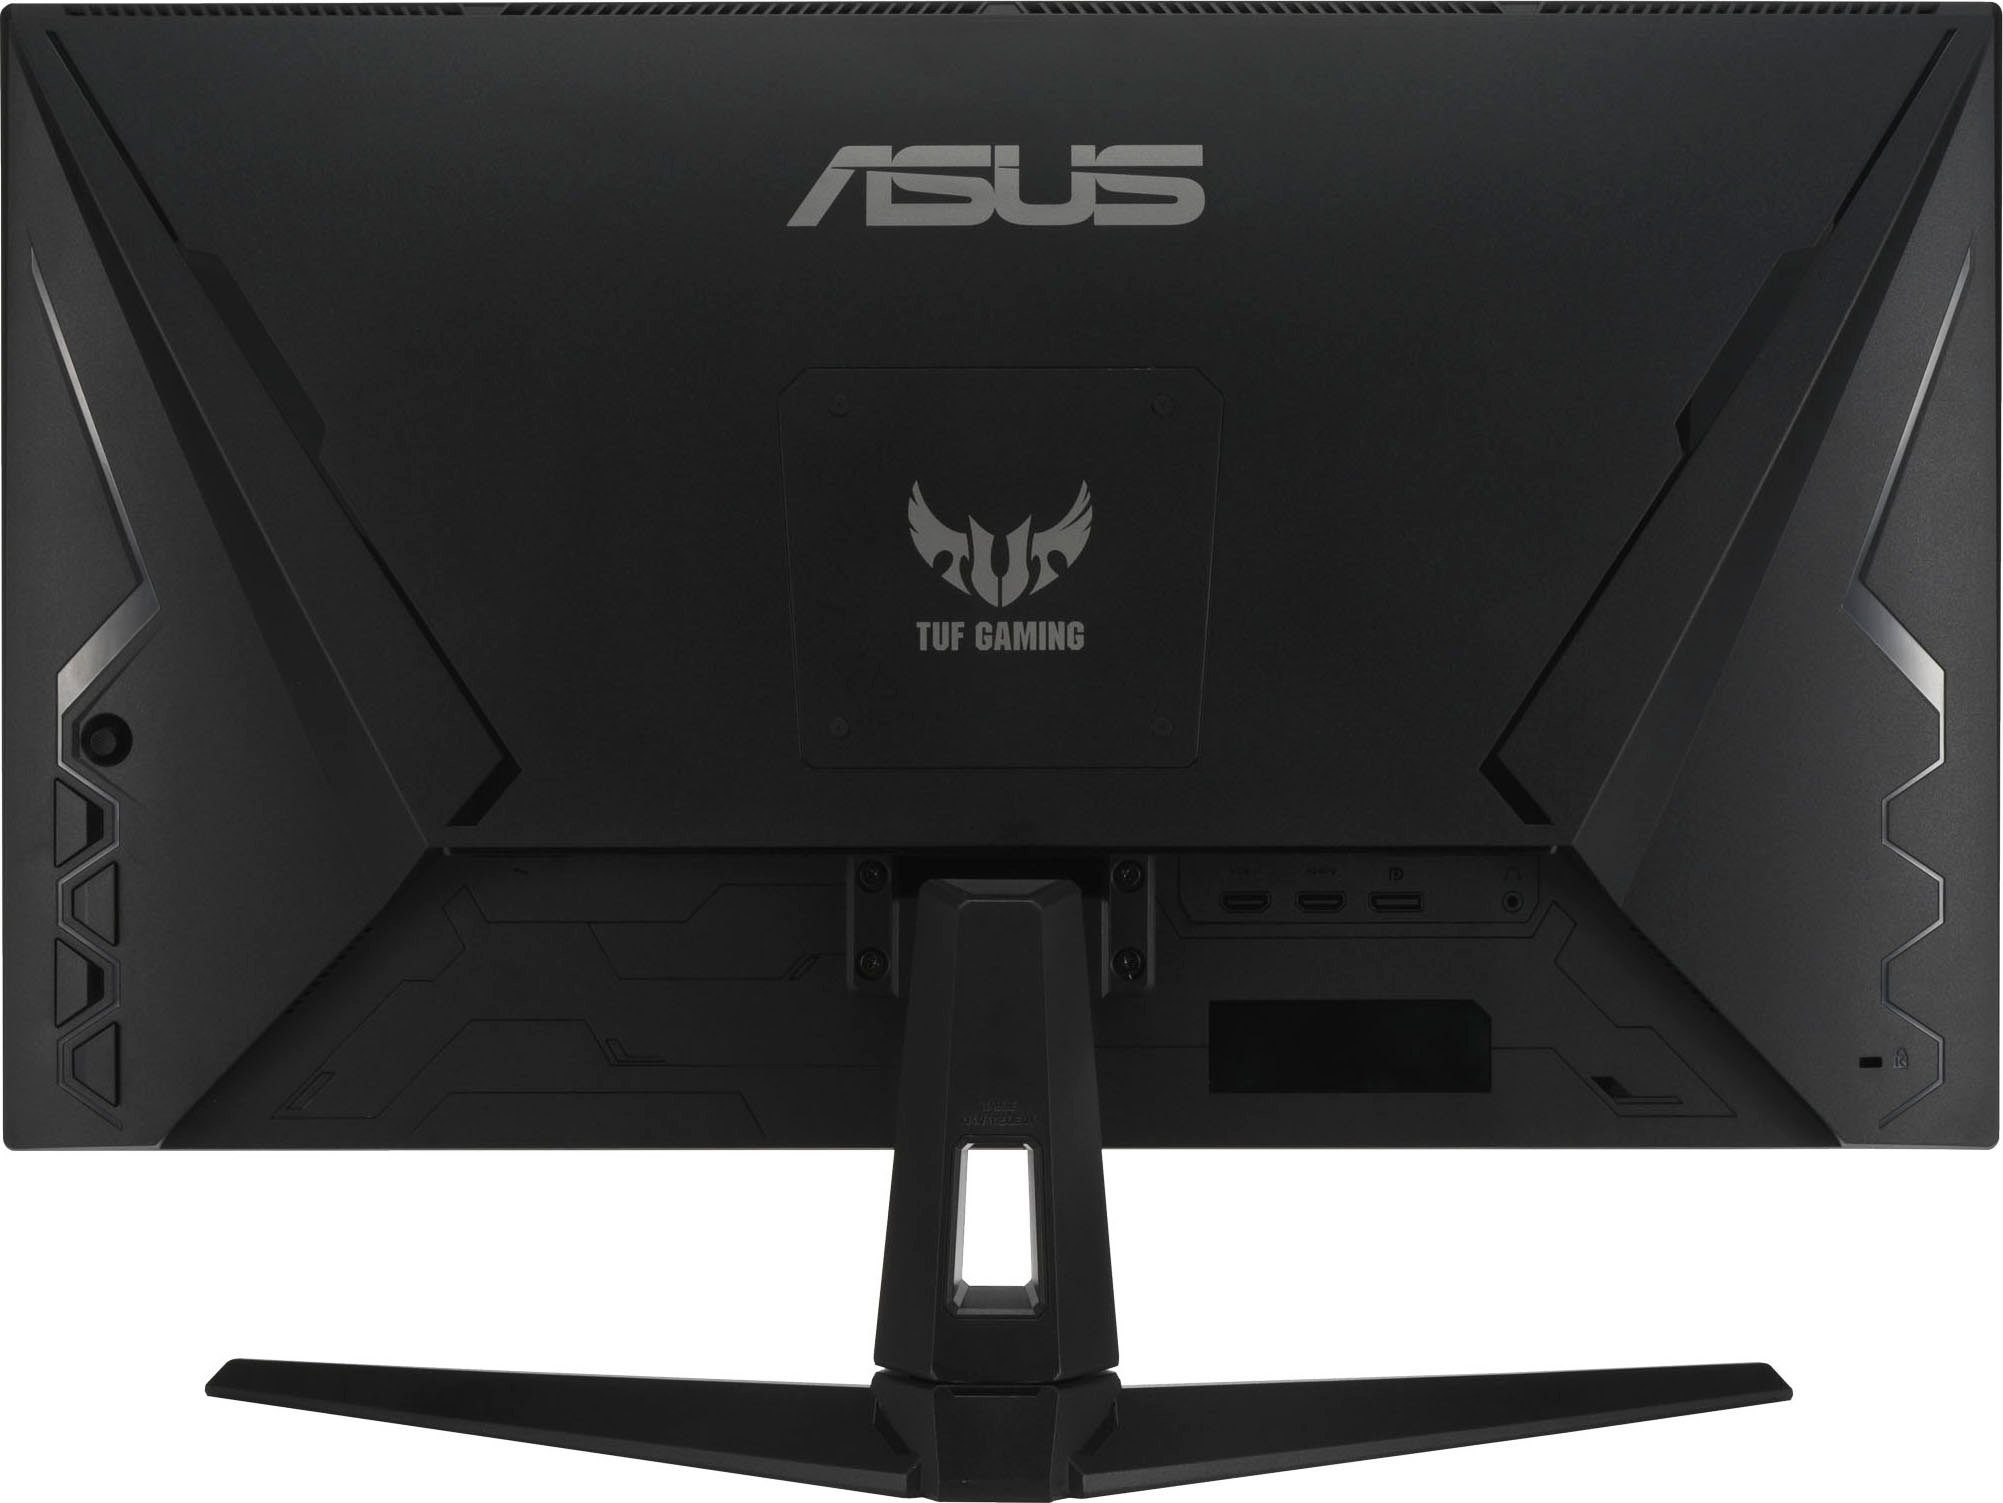 Reaktionszeit, Asus Hz, 5 ms 2160 HD, cm/28 3840 x ", 4K IPS) 60 VG289Q1A LED-Monitor Ultra (71,12 px,